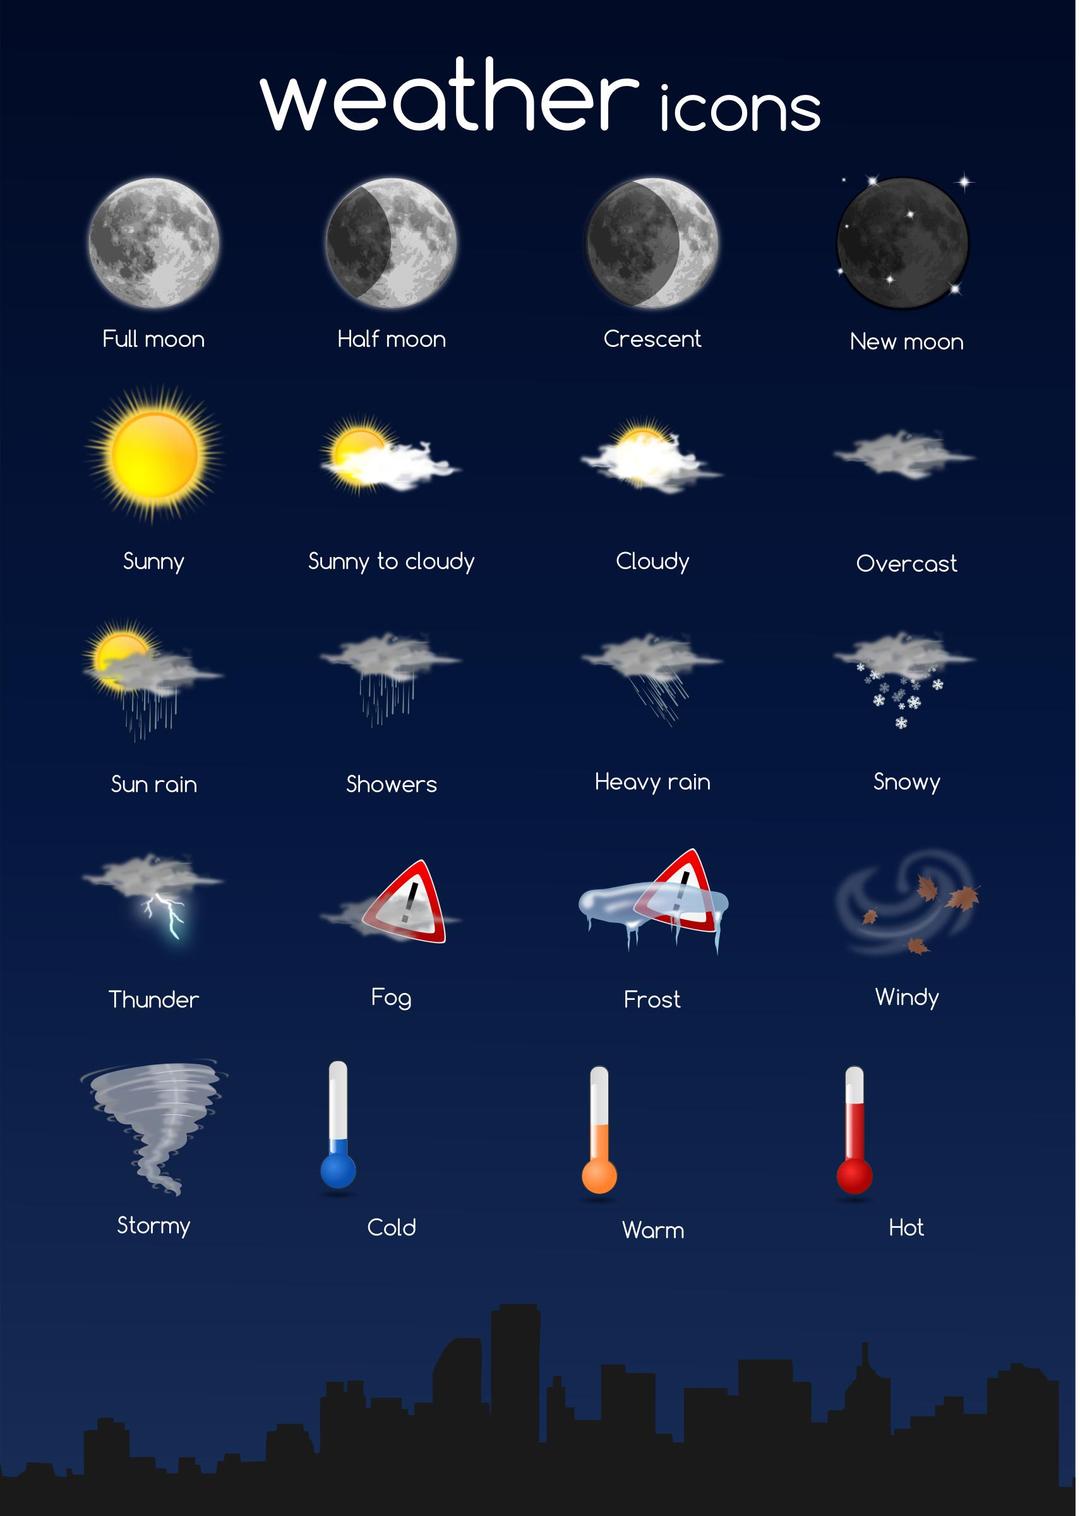 weather icon - complete set png transparent